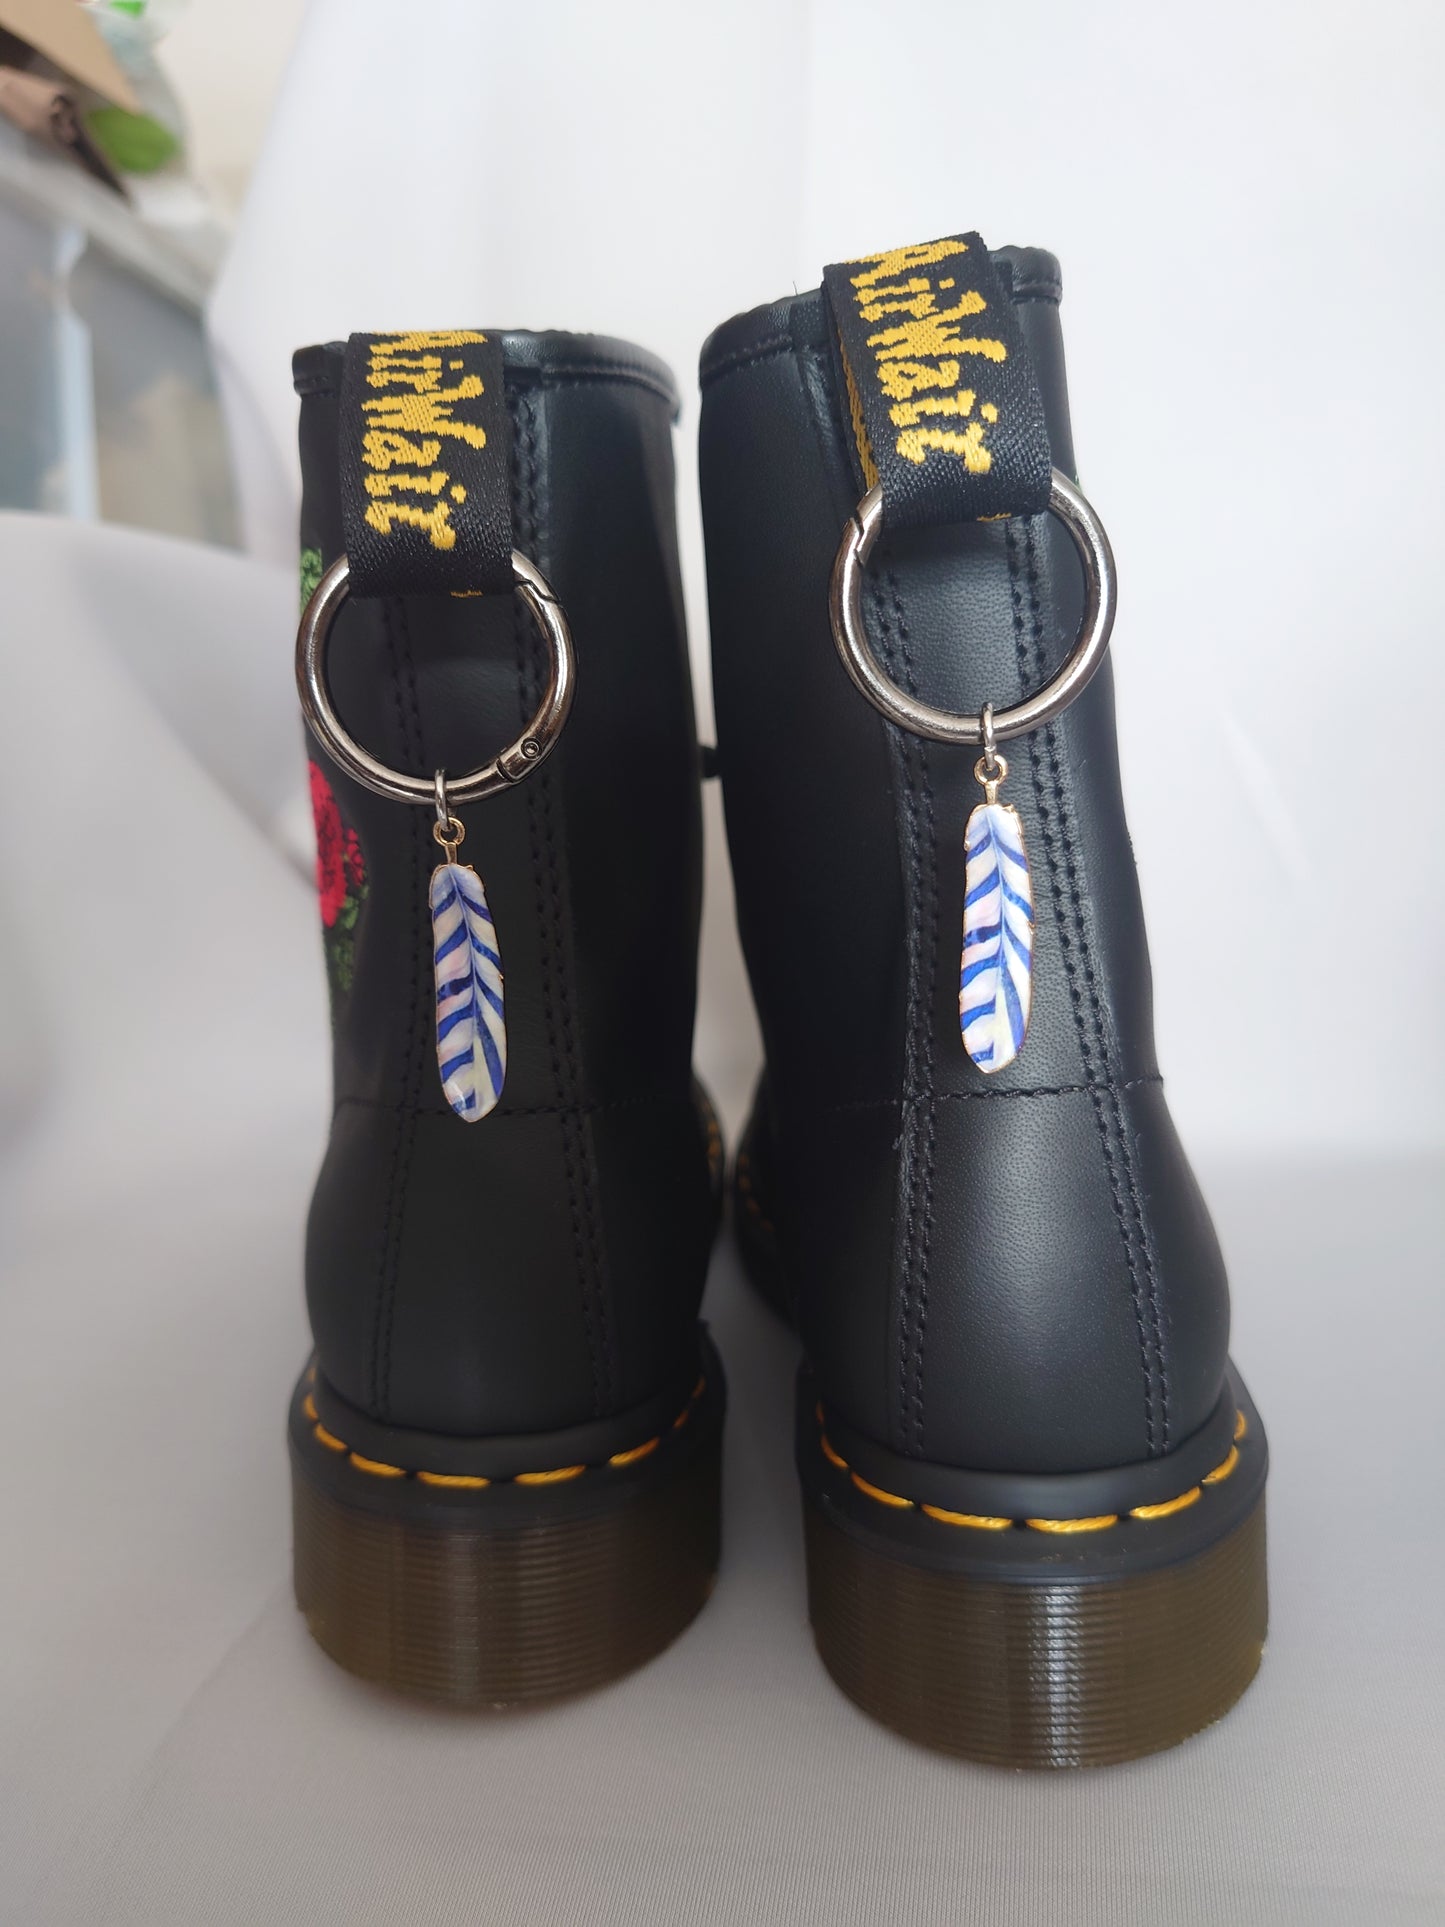 Feather boot charms